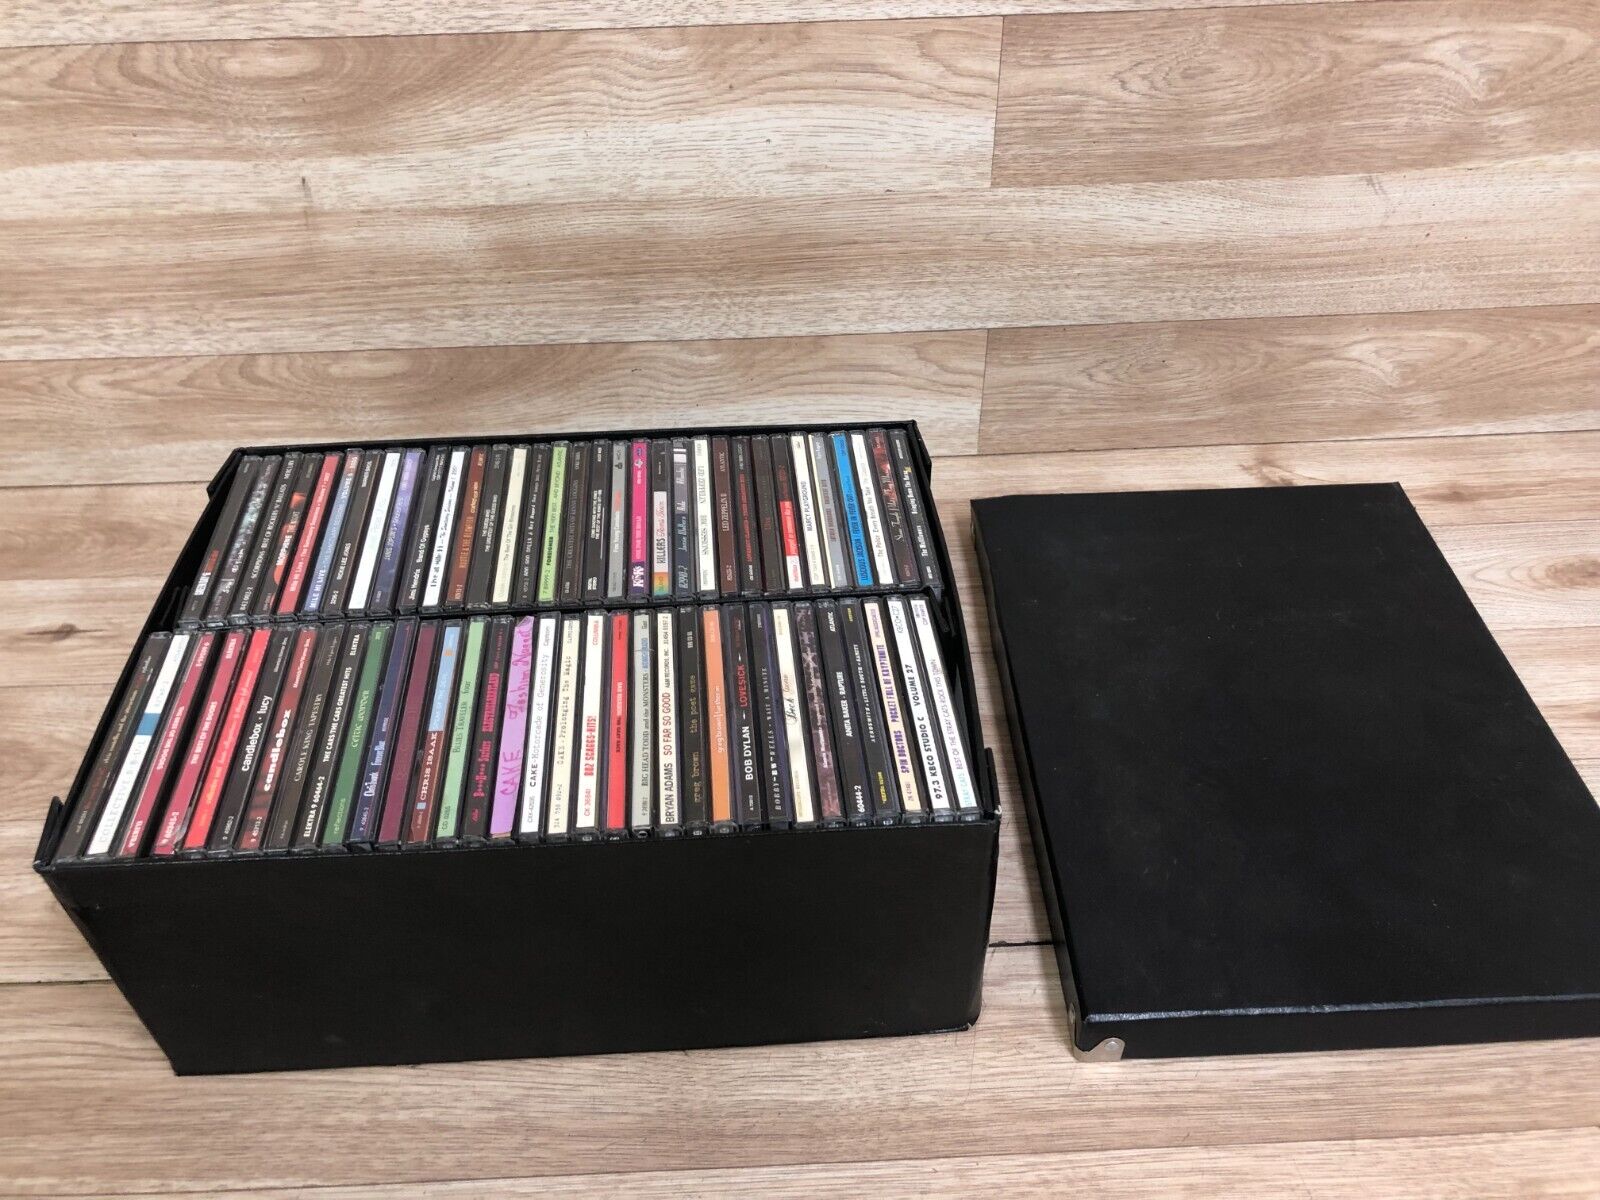 LOT OF MUSIC CDS CD DISC WITH CASE BOX HOLDER VINTAGE CLASSIC MIXED ARTIST 2